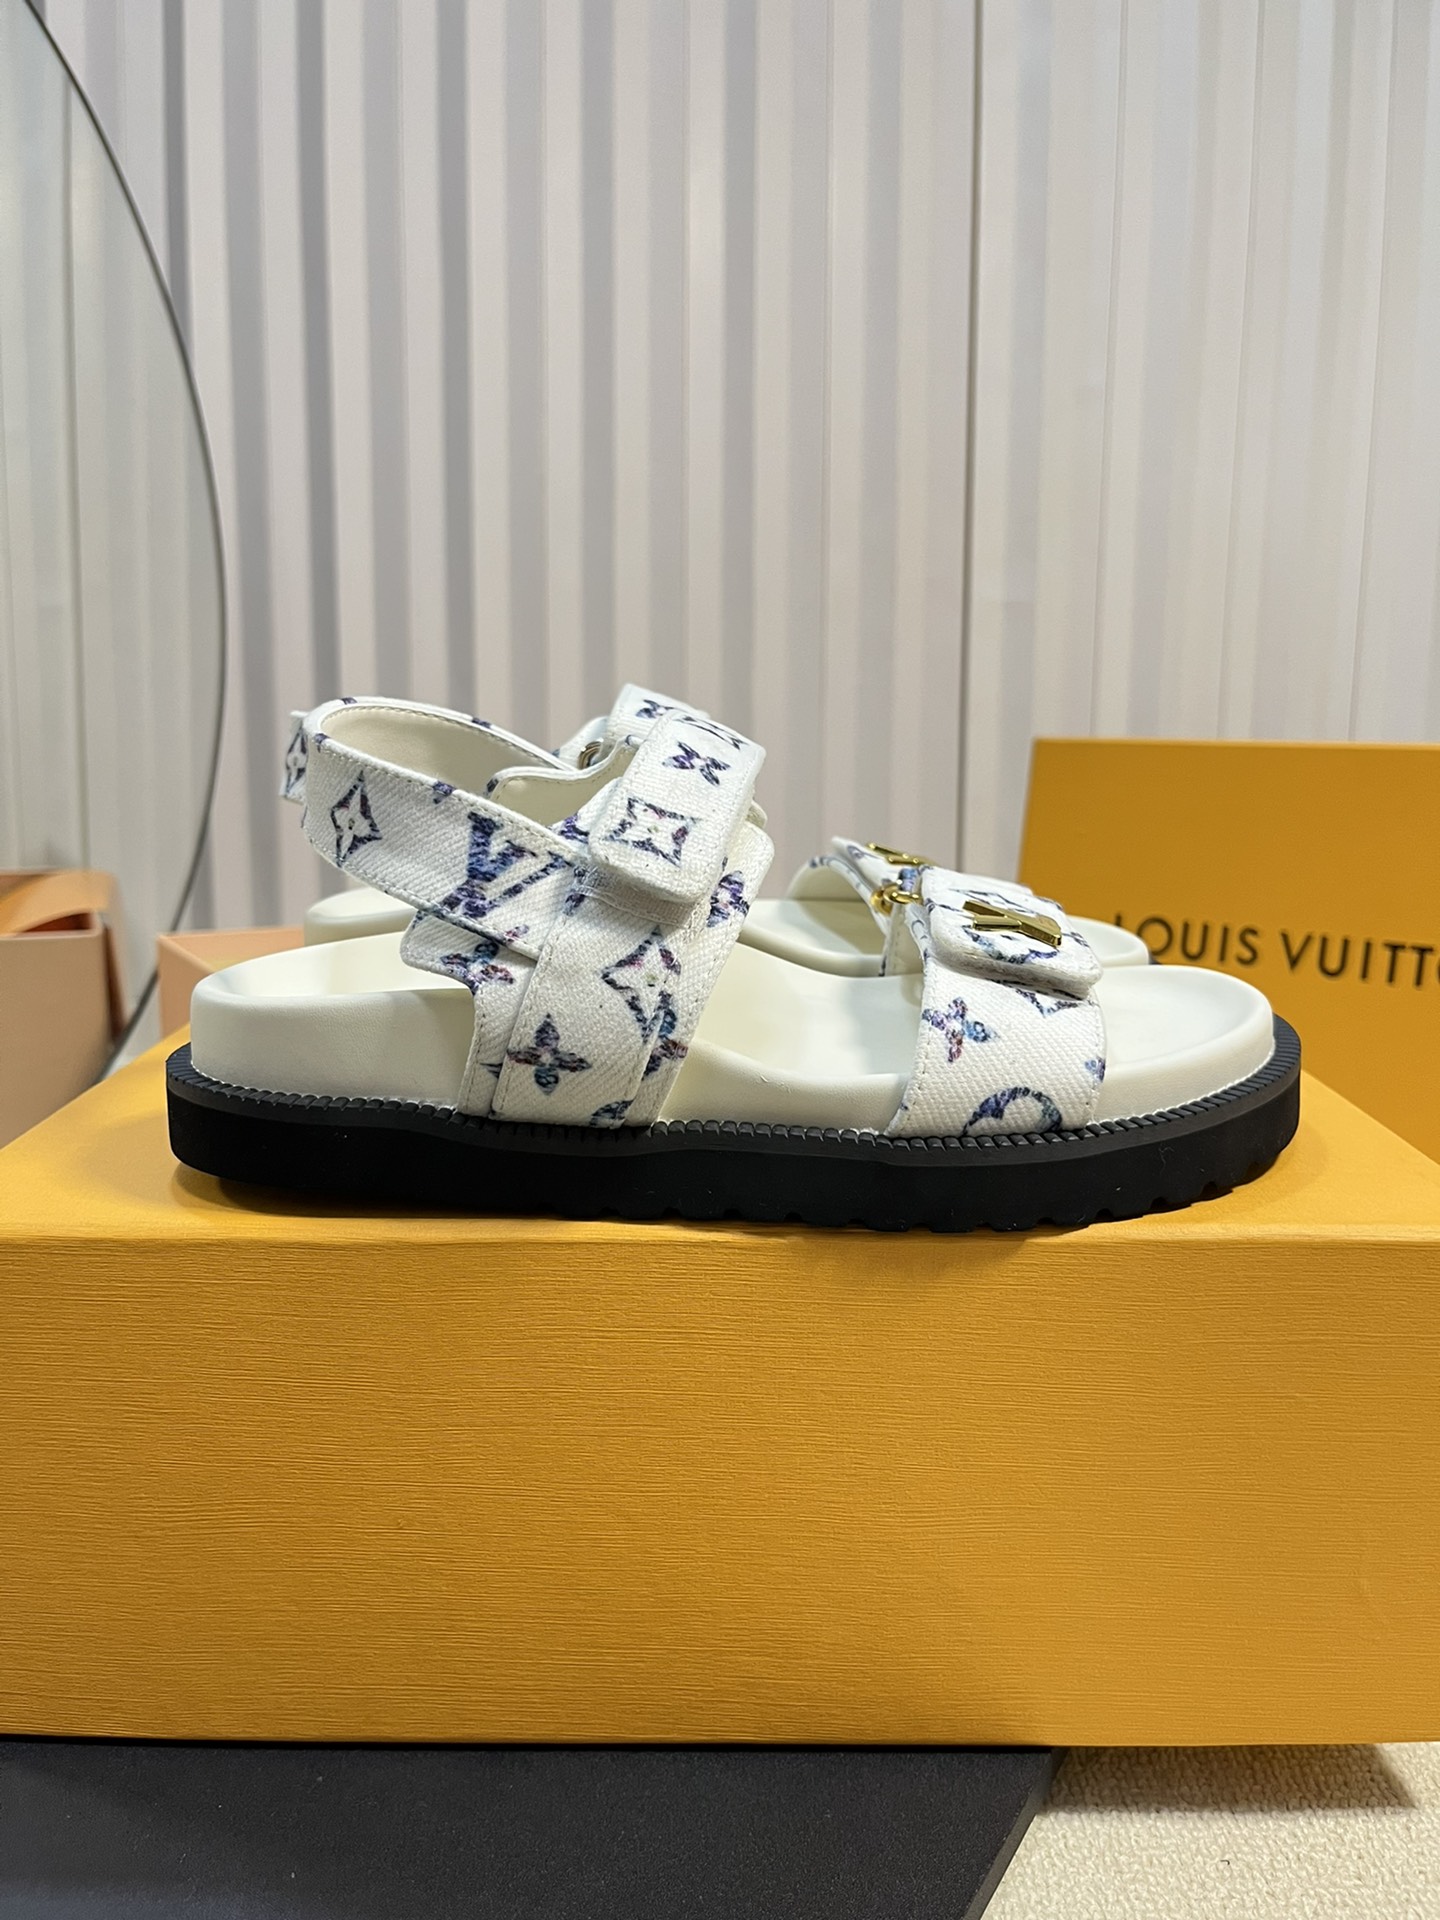 Louis Vuitton Shoes Sandals High Quality
 Printing Sheepskin Spring/Summer Collection